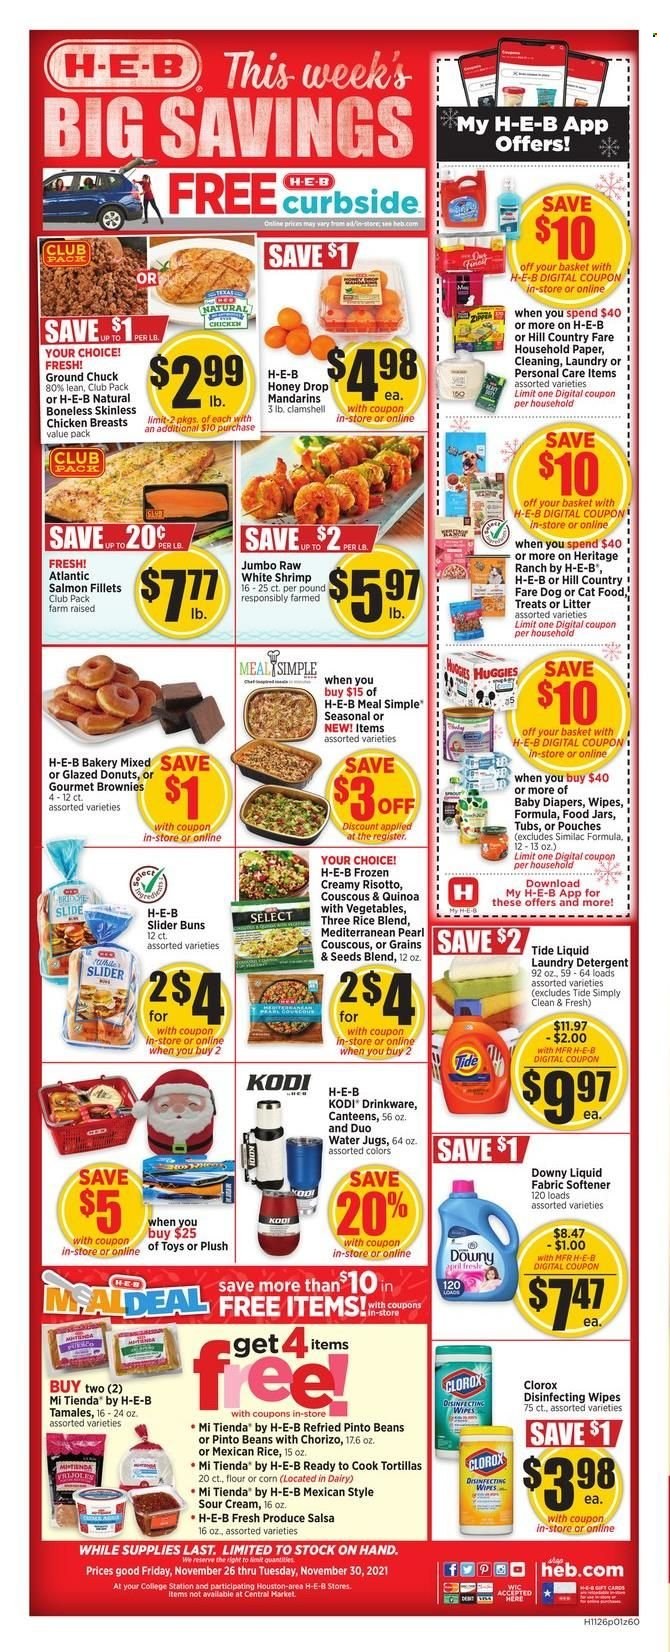 thumbnail - H-E-B Flyer - 11/26/2021 - 11/30/2021 - Sales products - tortillas, buns, brownies, donut, beans, corn, mandarines, salmon fillet, shrimps, risotto, chorizo, sour cream, pinto beans, couscous, quinoa, salsa, honey, Similac, chicken breasts, ground chuck, wipes, Huggies, nappies, detergent, Clorox, Tide, fabric softener, laundry detergent, Downy Laundry, drinkware, jar, paper, animal food, cat food. Page 1.